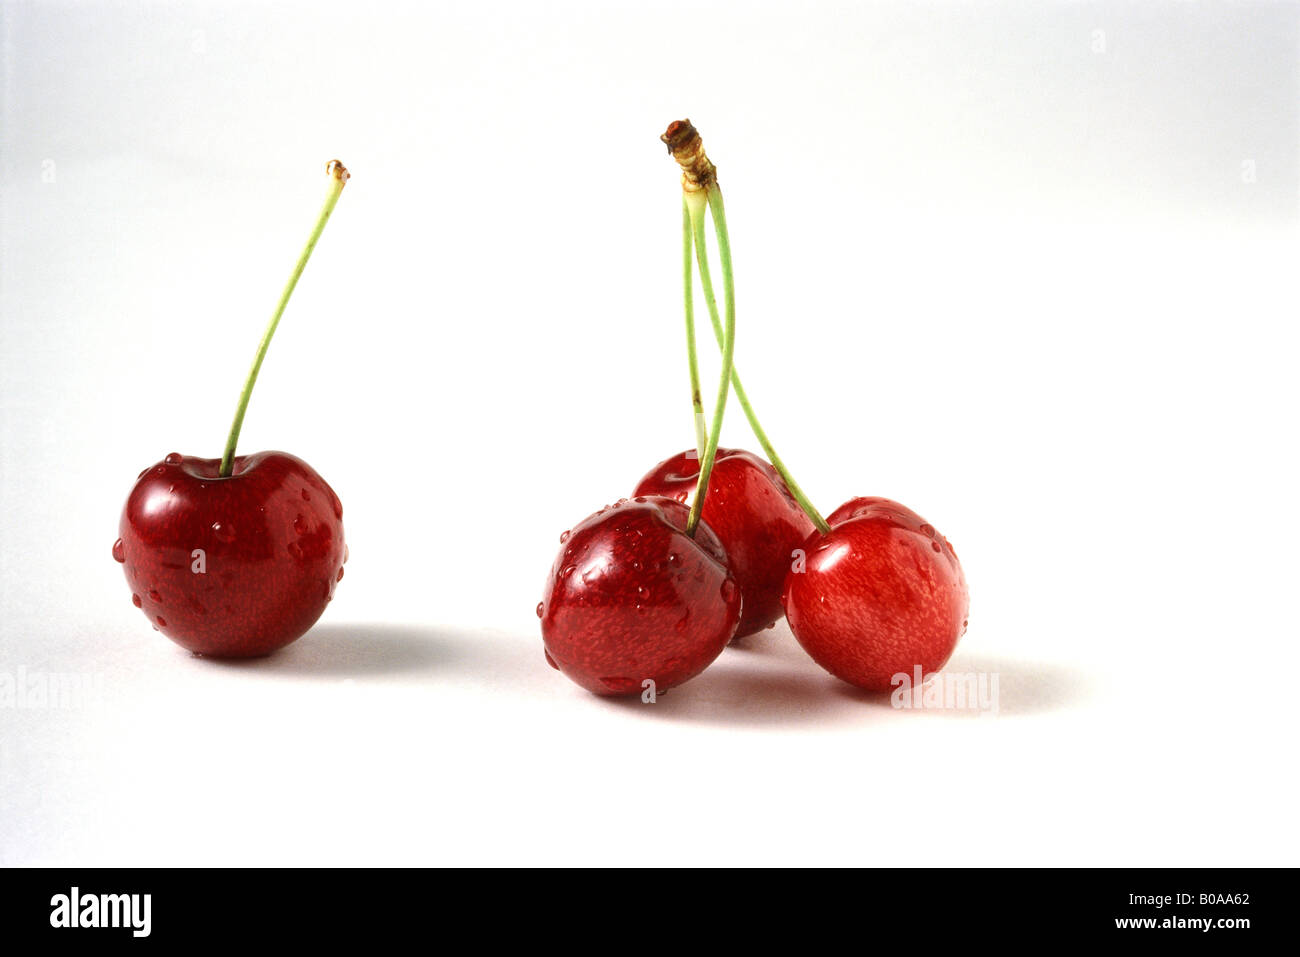 Cherries with water droplets, close-up Stock Photo